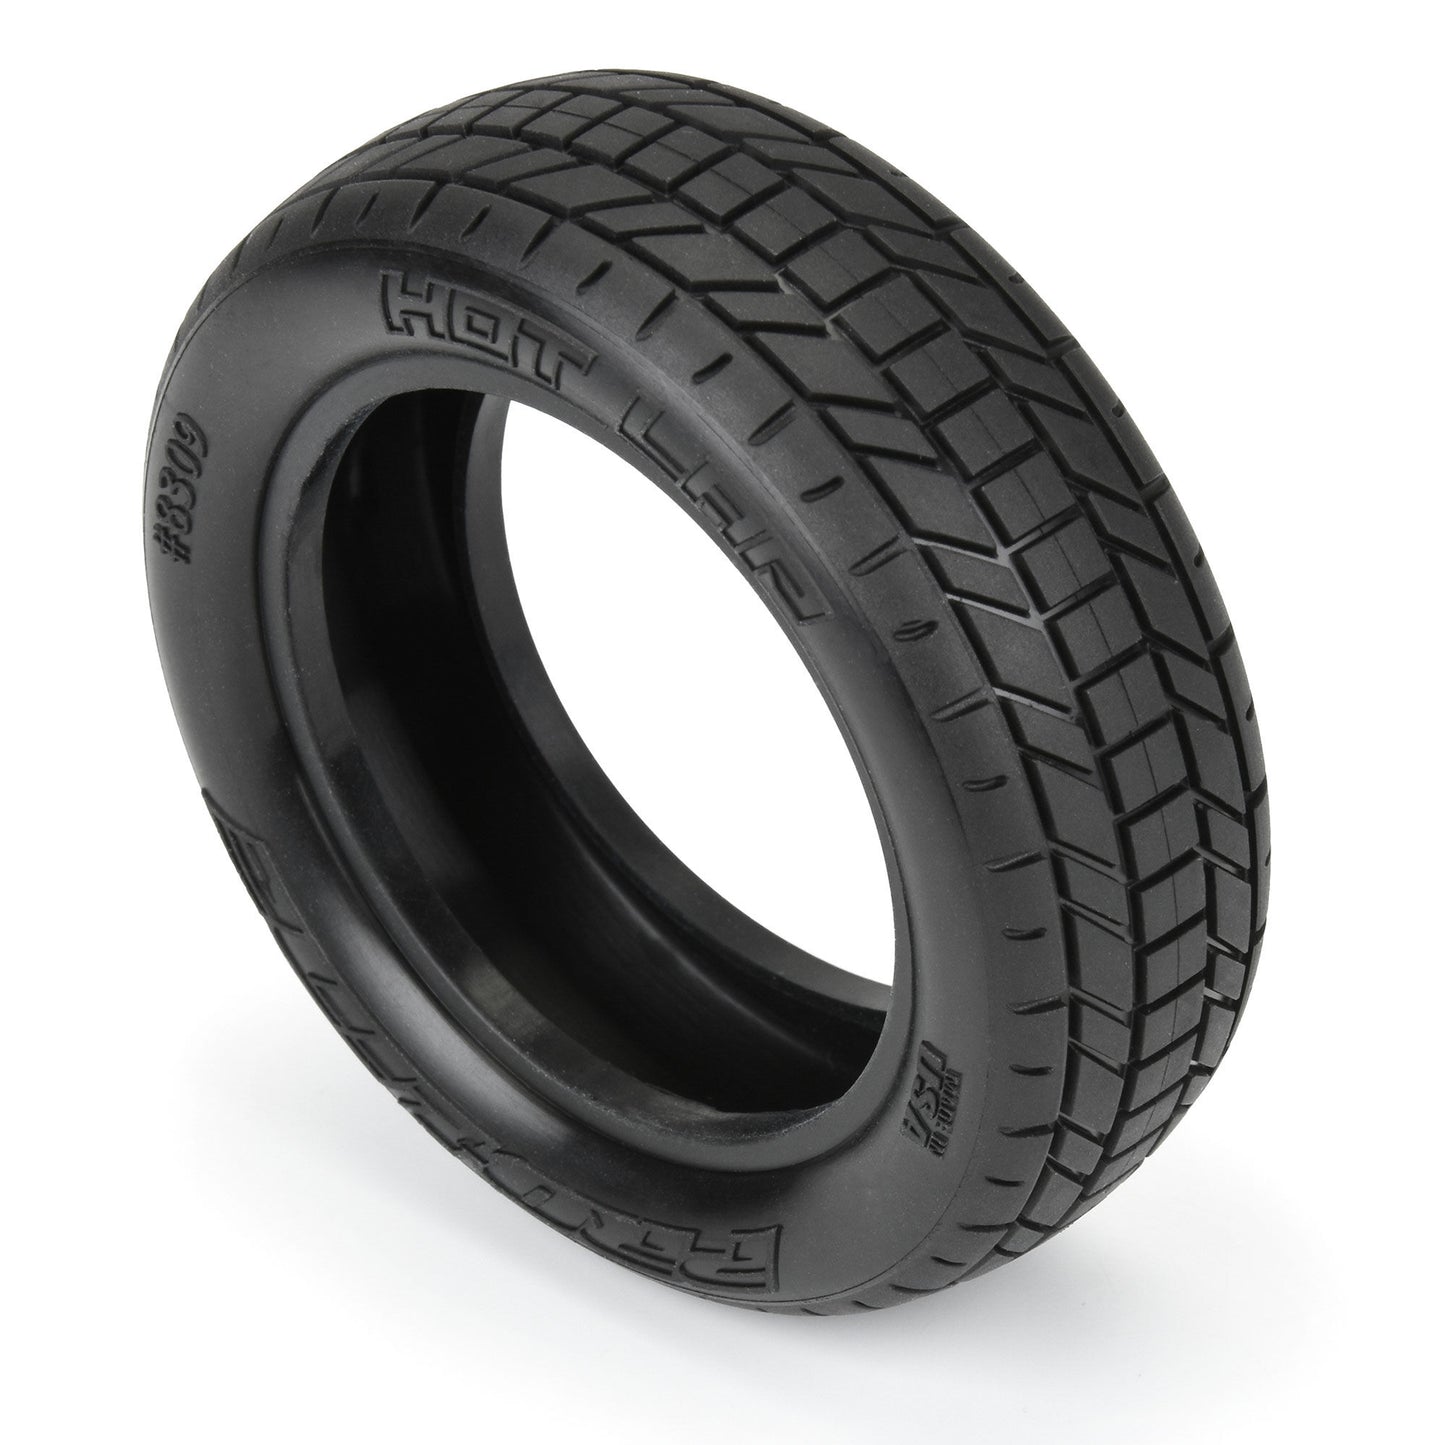 Hot Lap 2.2” M4 (Super Soft) Dirt Oval Buggy 2WD Front Tires (2)